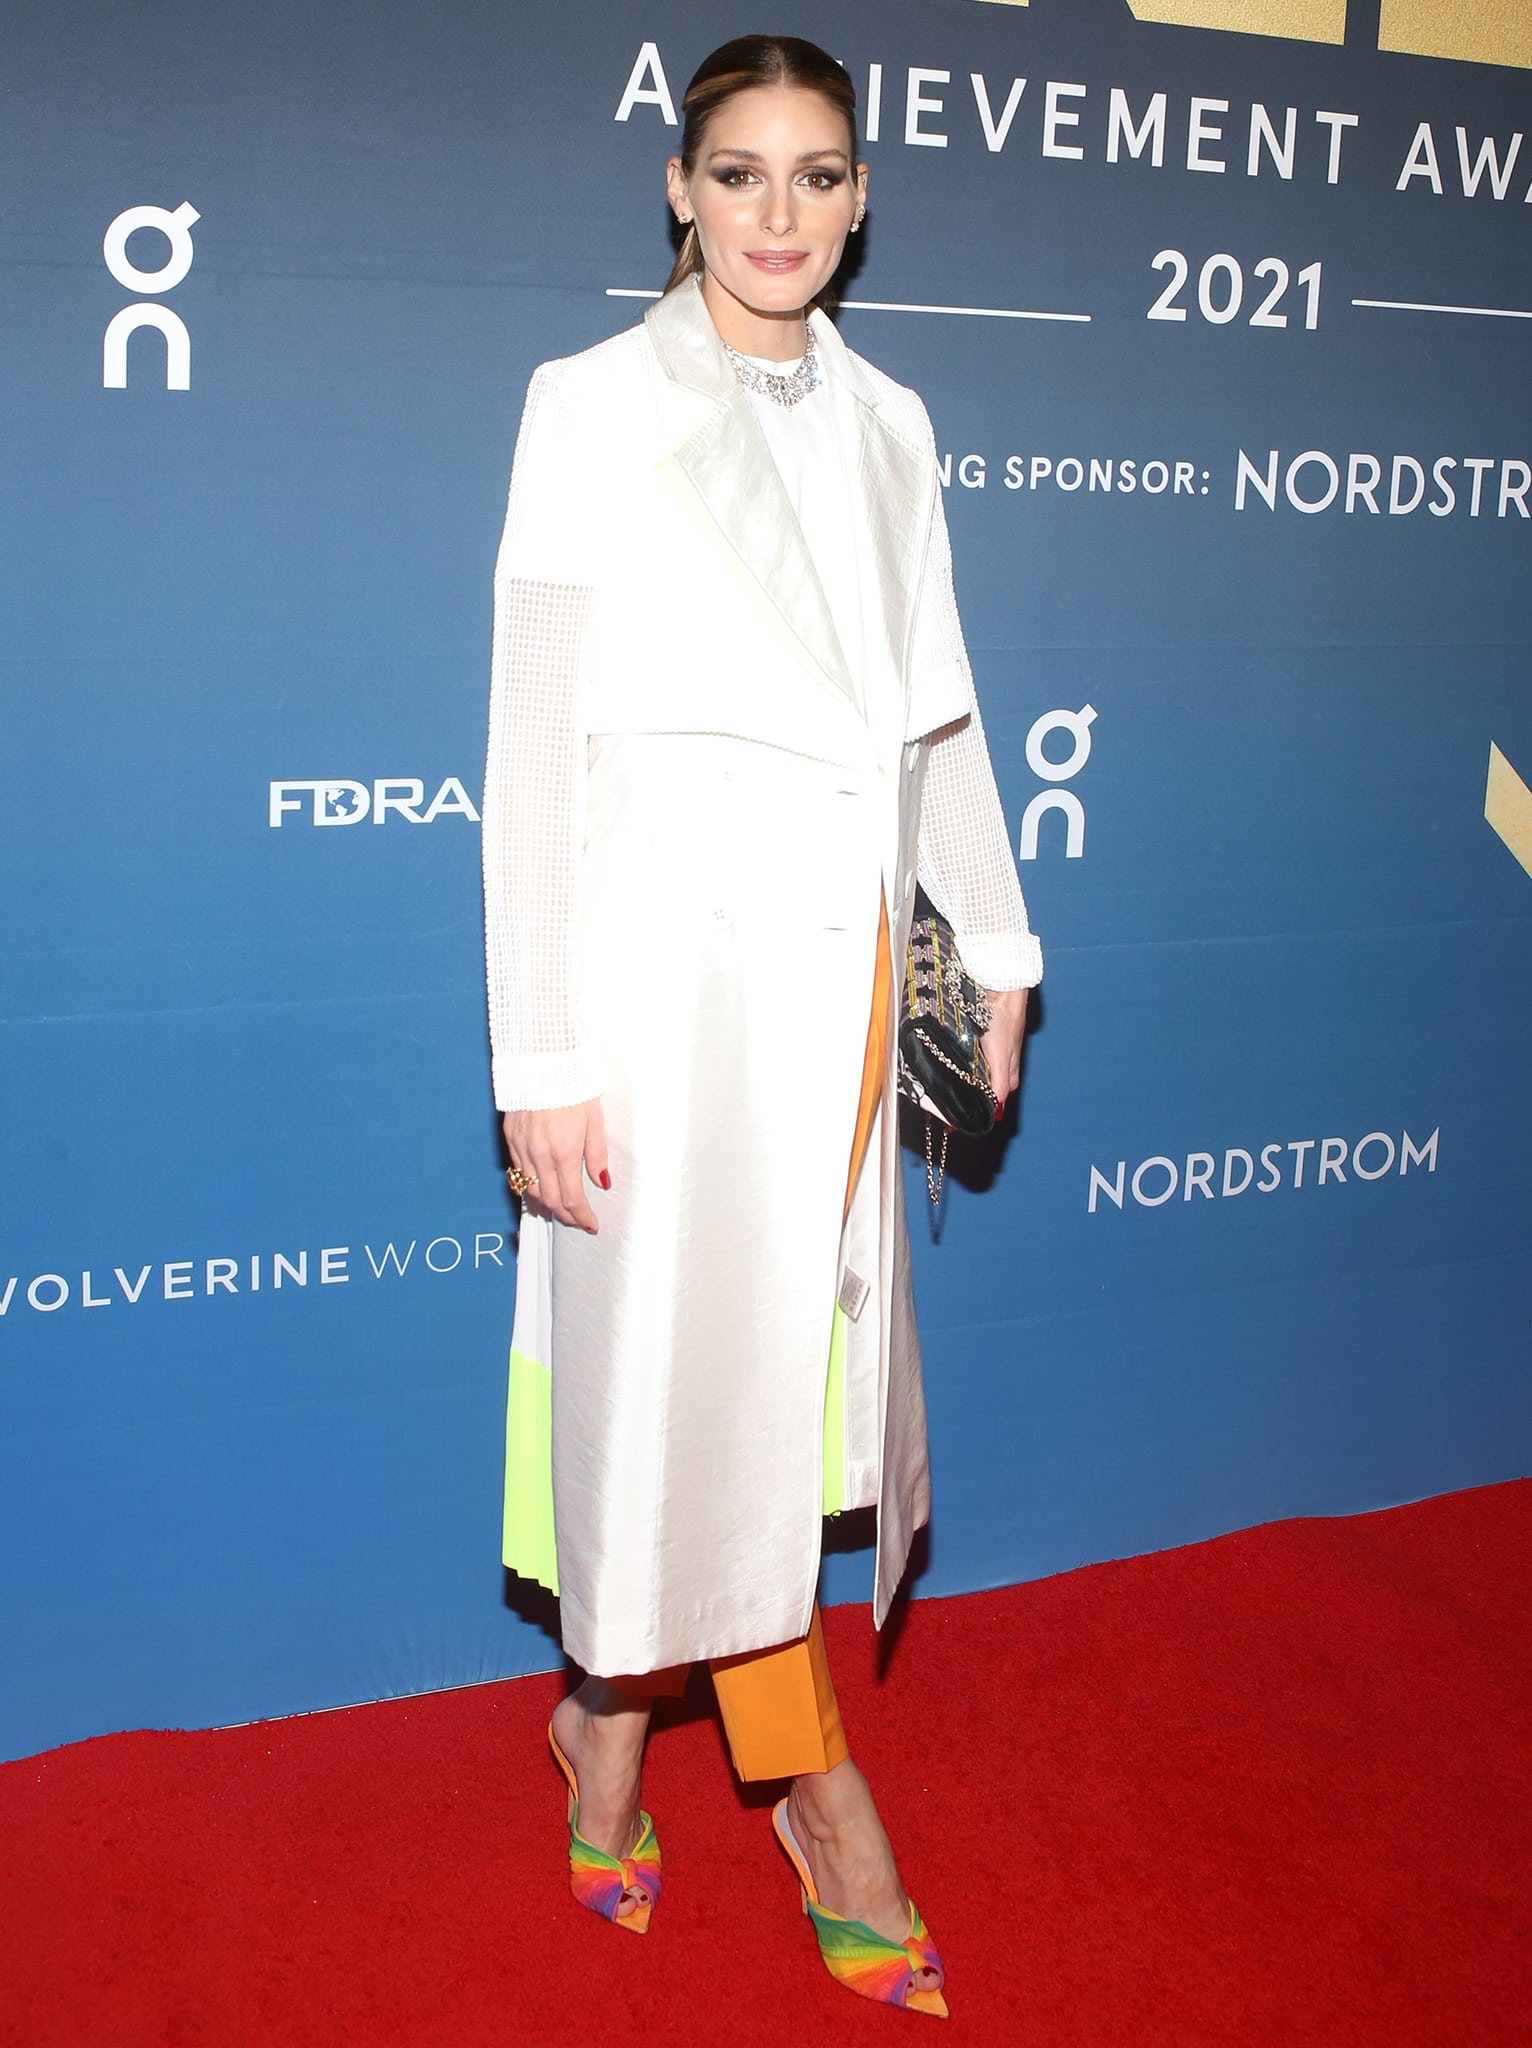 Olivia Palermo dons a chic white Three Floor coat with a white Victoria Beckham tee and marigold trousers